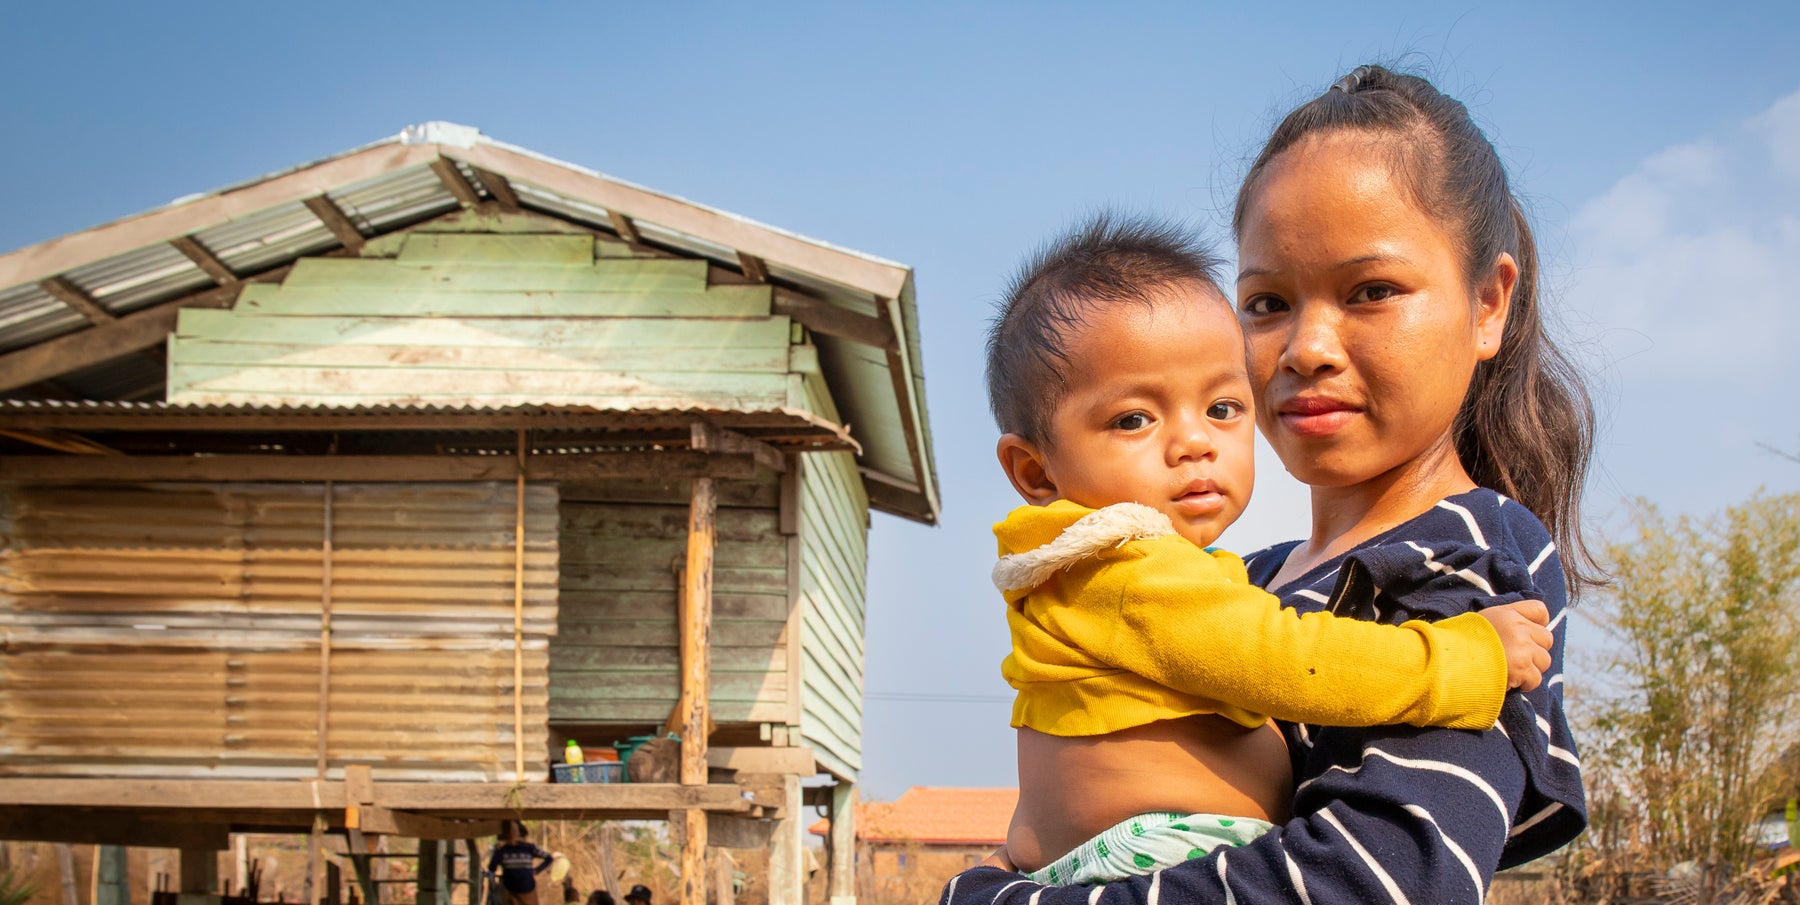 A local mother and her baby in a rural community of Laos